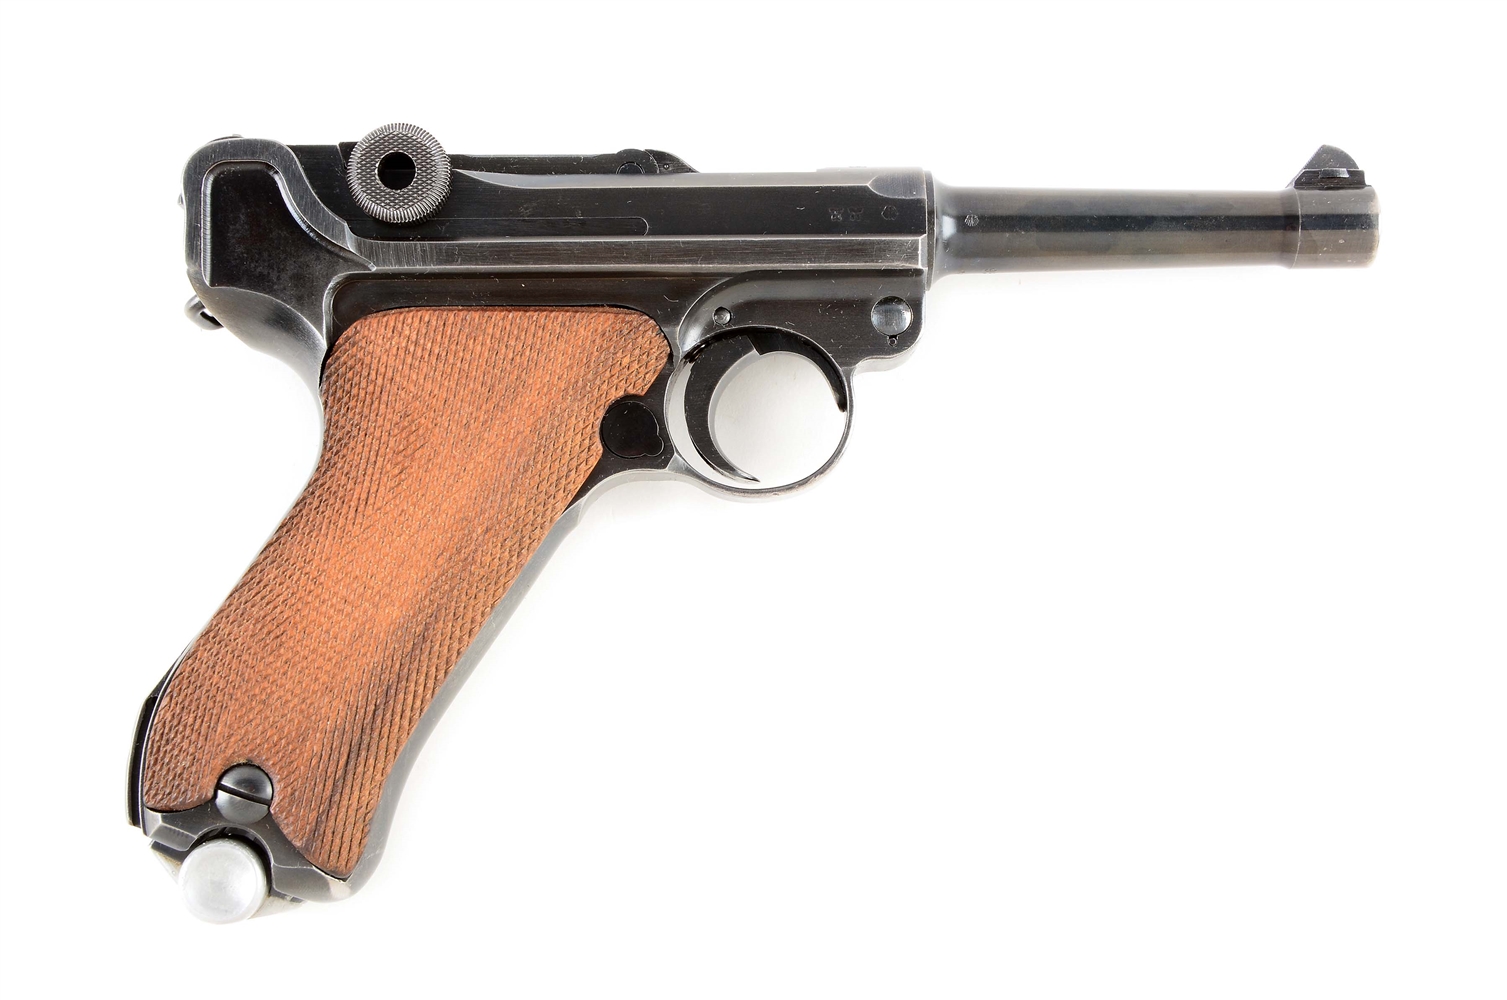 (C) NAZI MARKED 1938 DATED S/42 CODE LUGER SEMI-AUTOMATIC PISTOL.